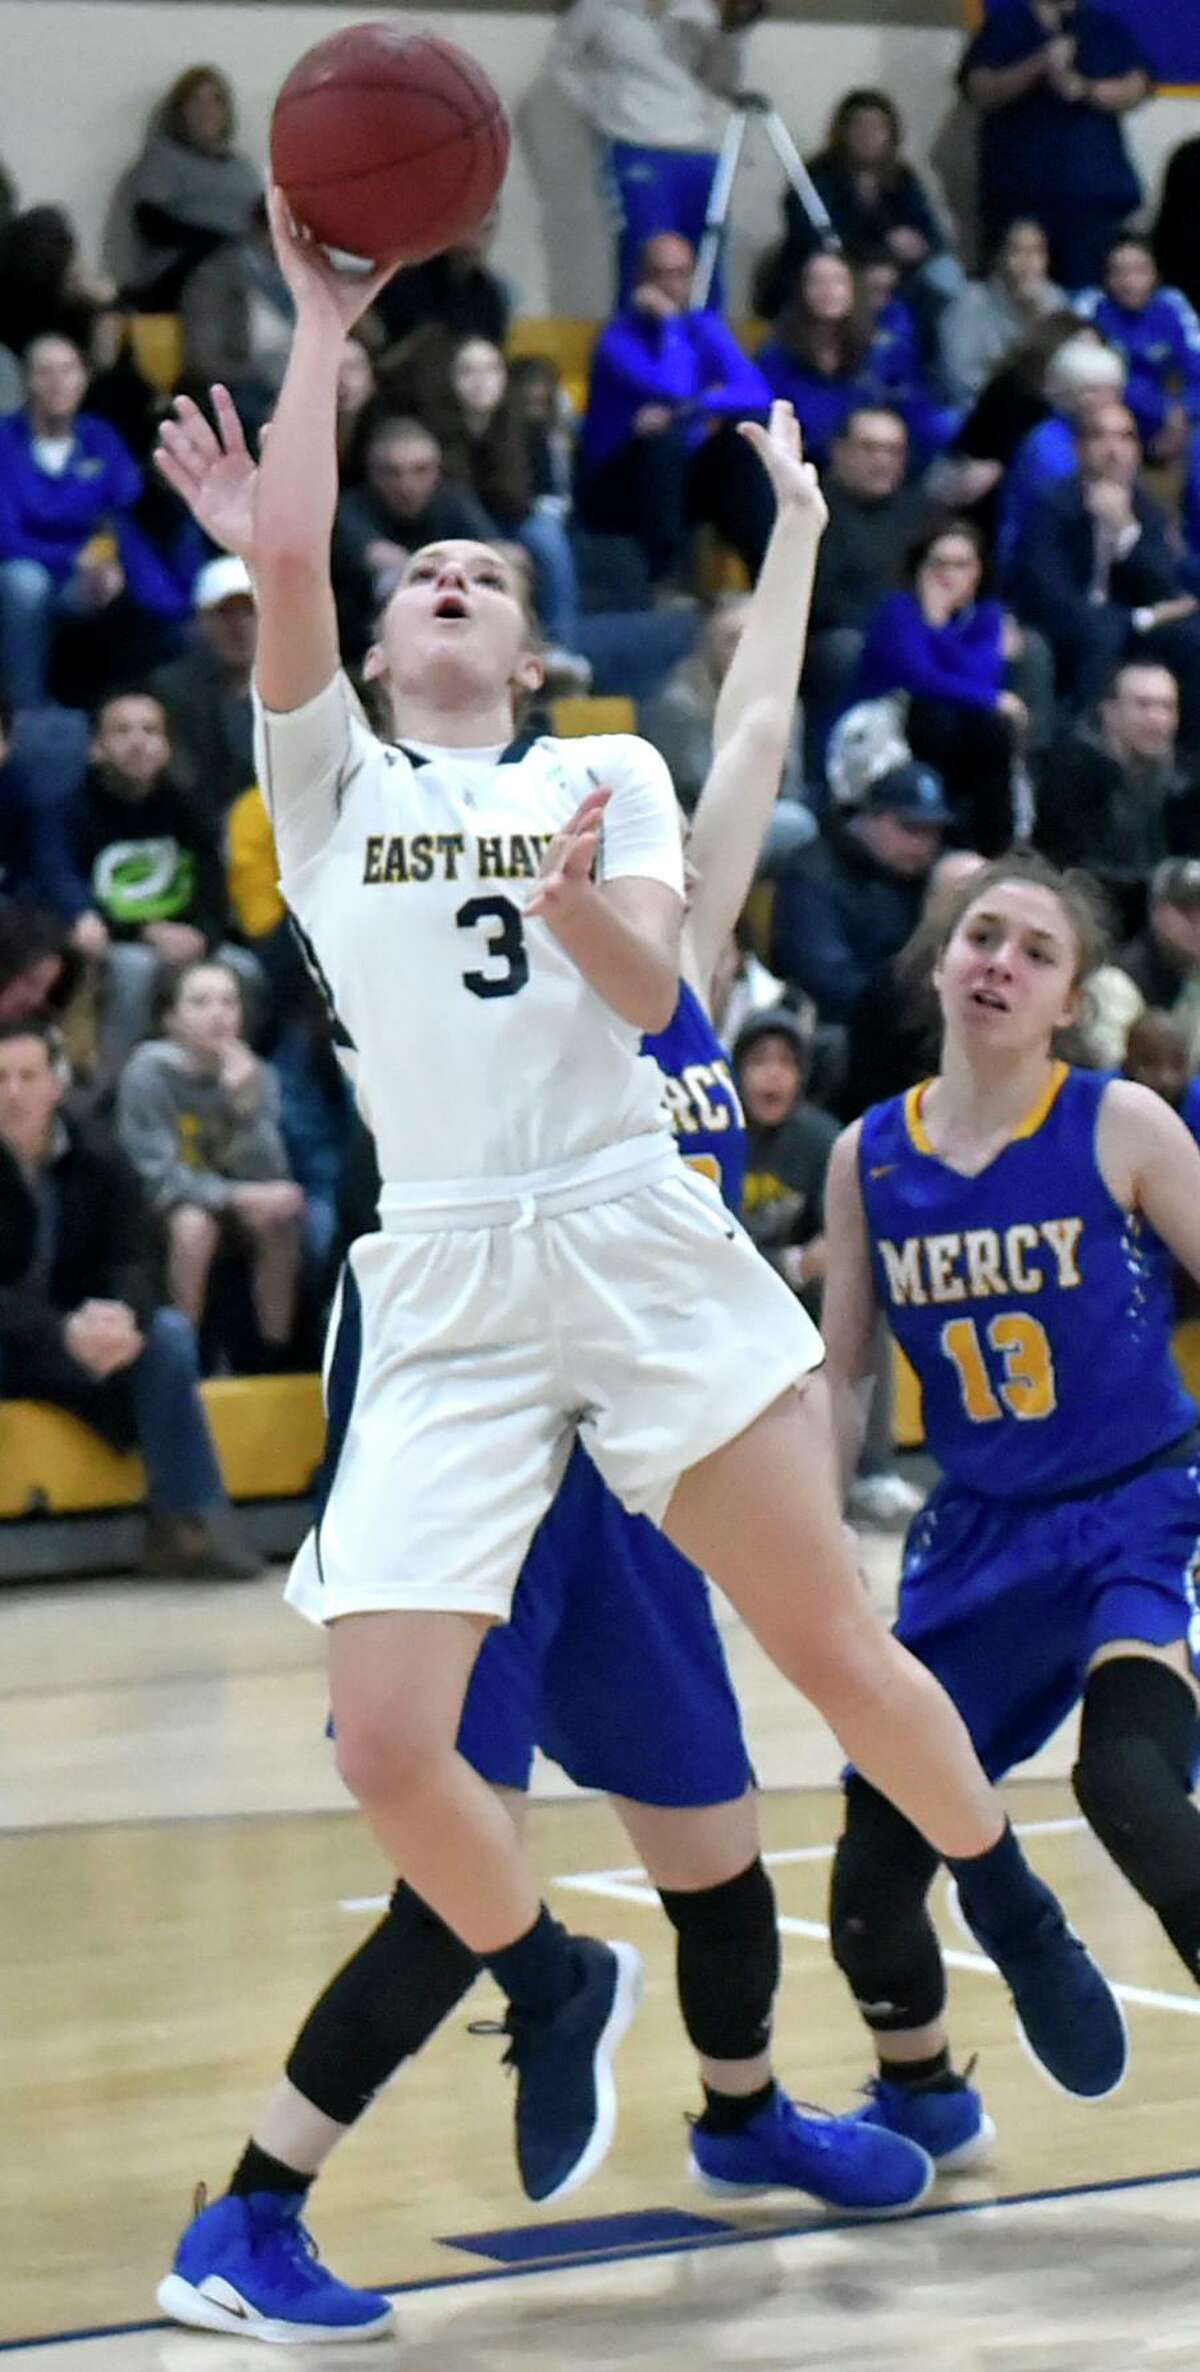 East Haven, Connecticut - Monday, February 11, 2019: Makenzie Helms of East Haven H.S. gets by Mercy H.S. of Middletown defenders Monday evening during second the quarter of girls basketball at East Haven H.S.